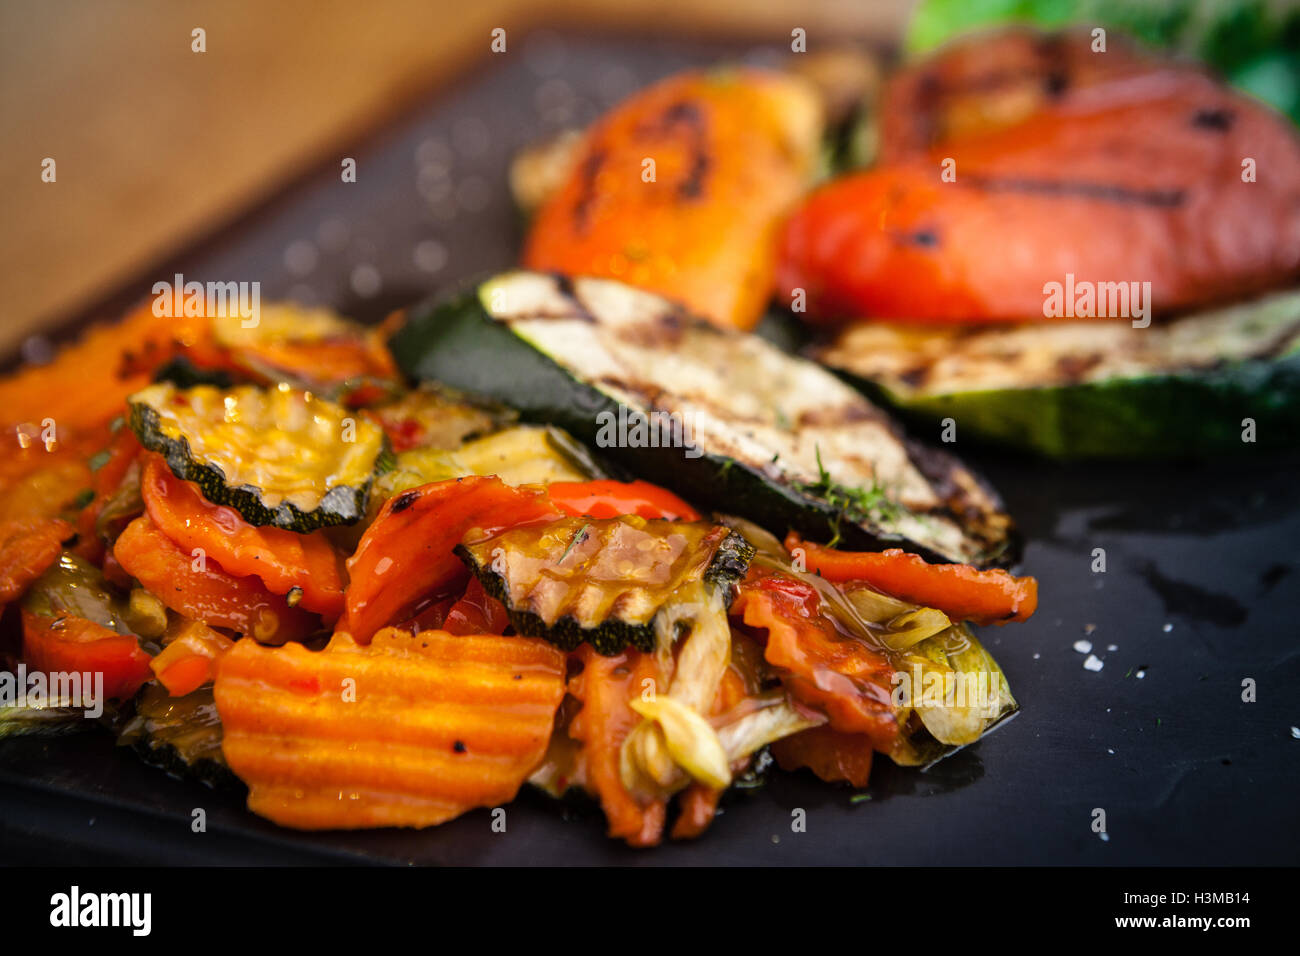 Grilled vegetables, baked in coal oven Stock Photo